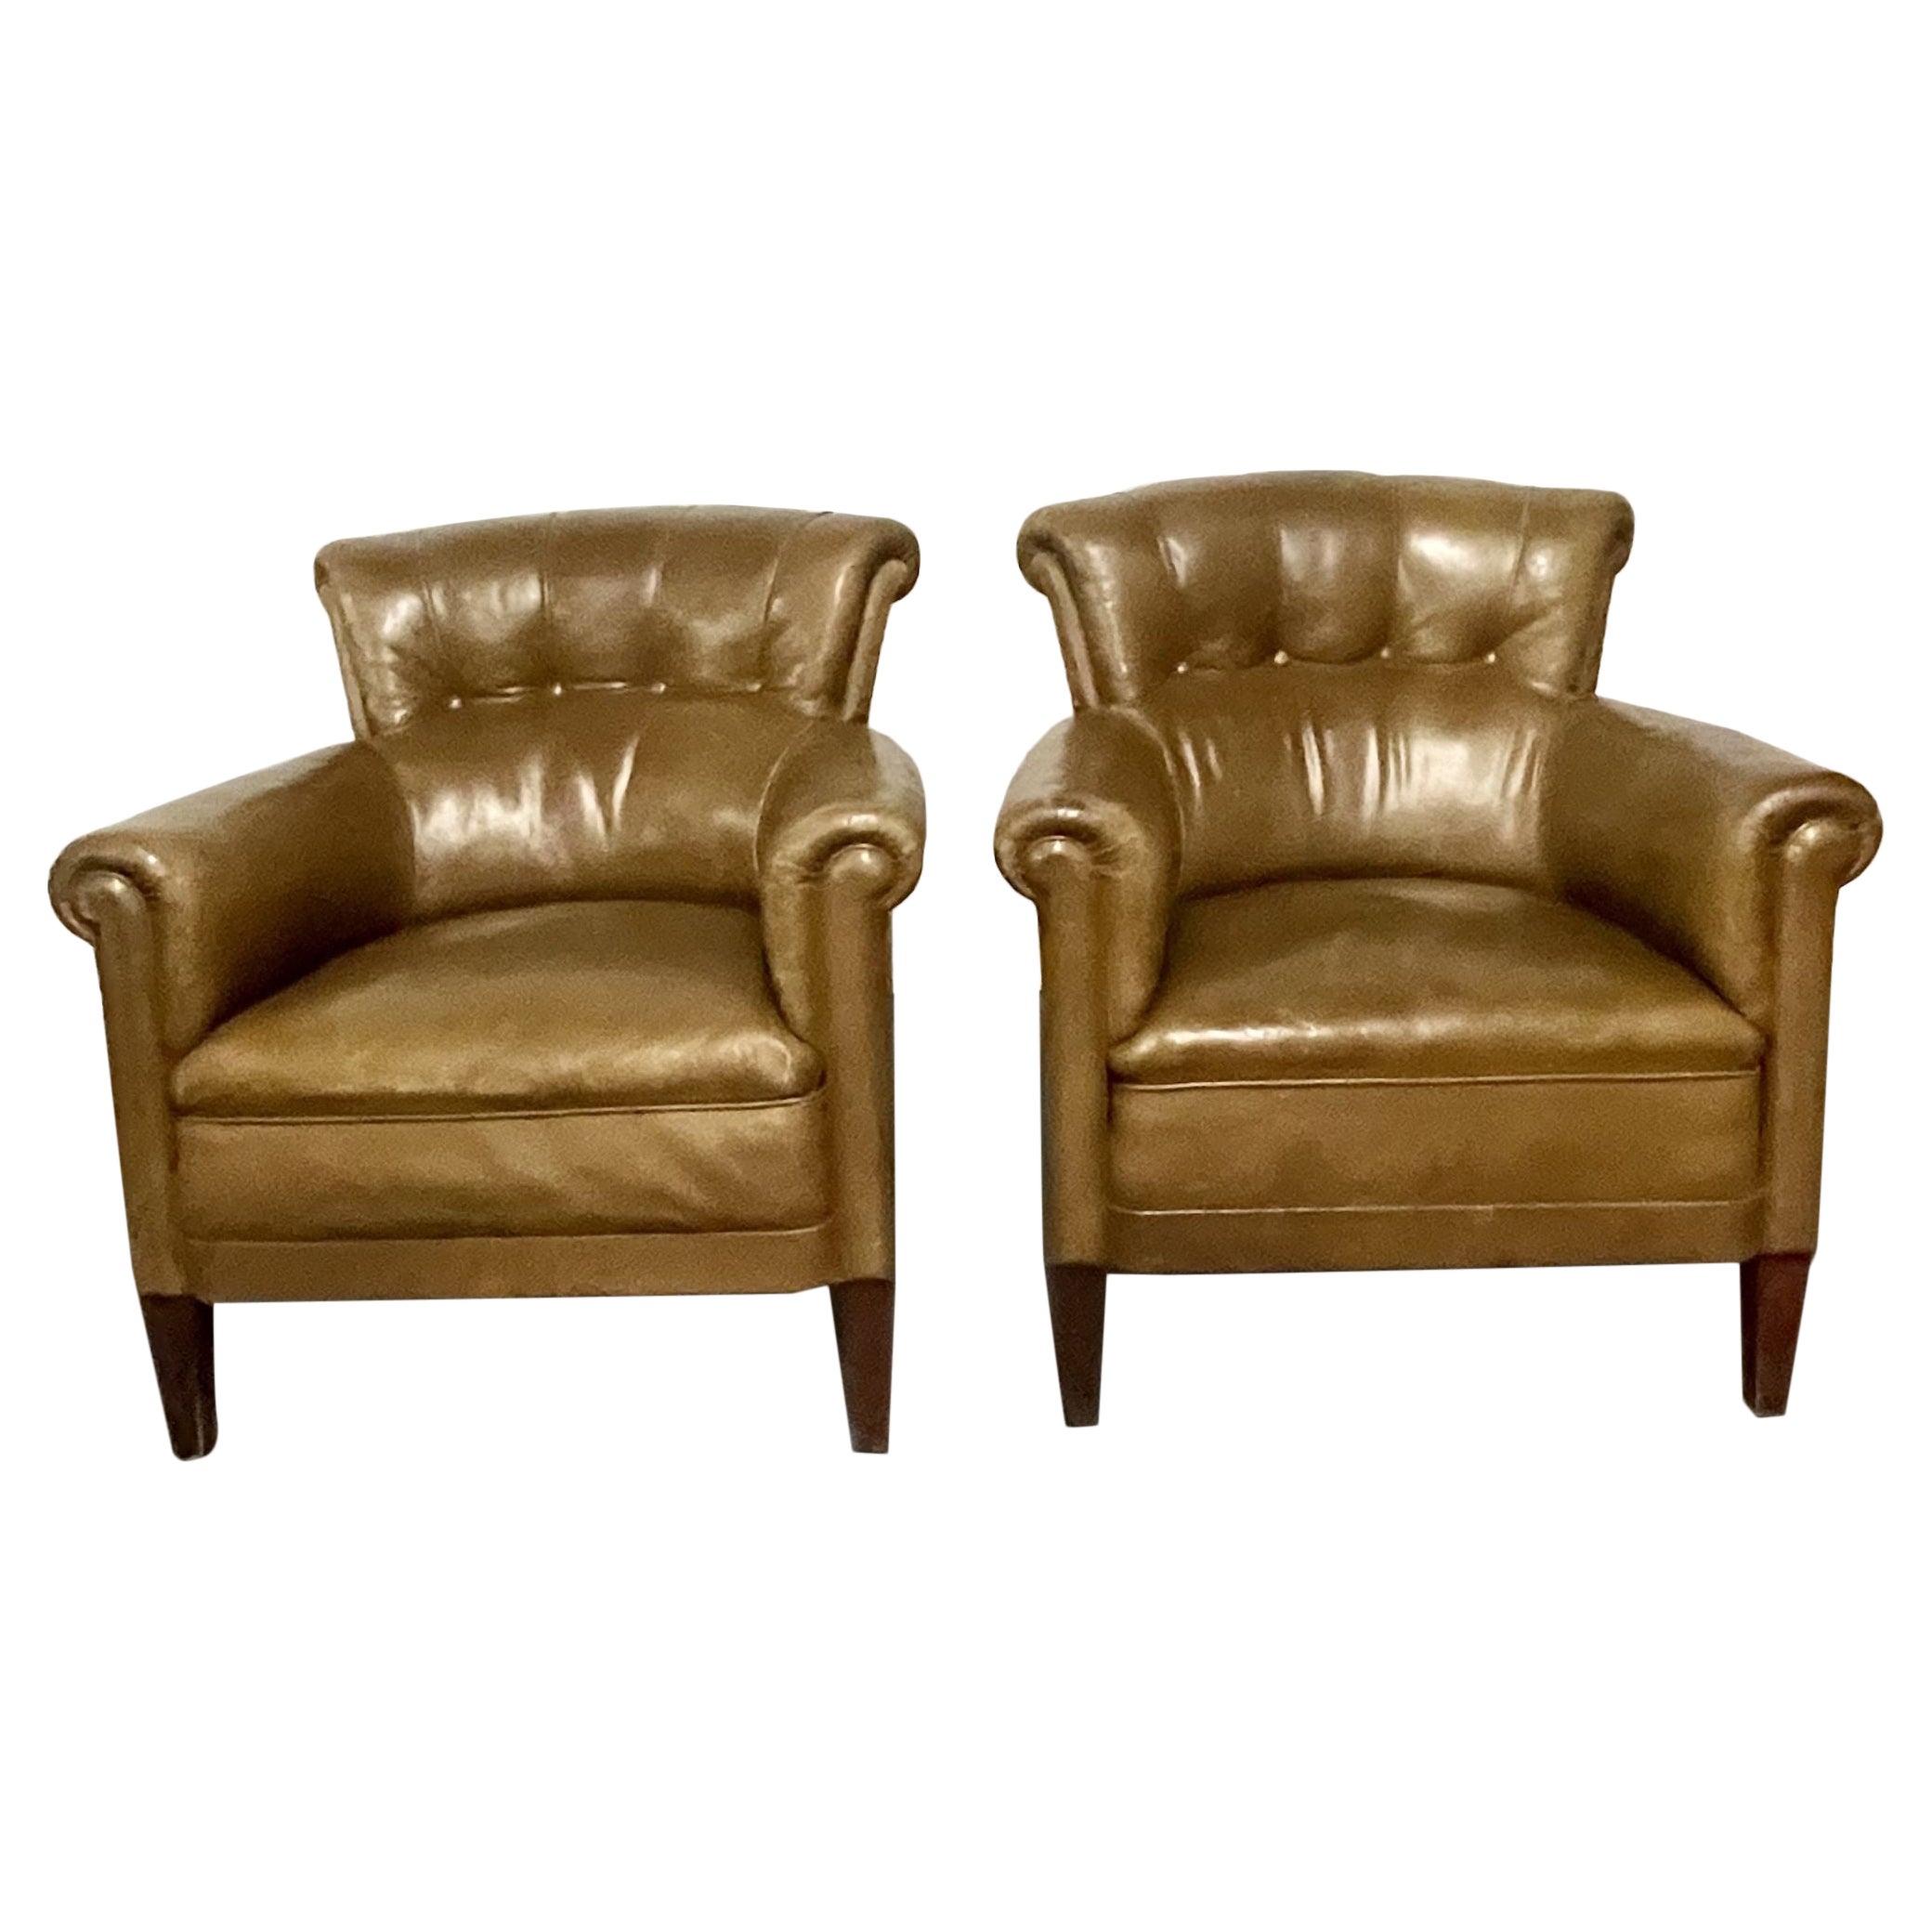 Pair of Leather Lounge Cigar Chairs, Mid 20th Century, Tuffted For Sale